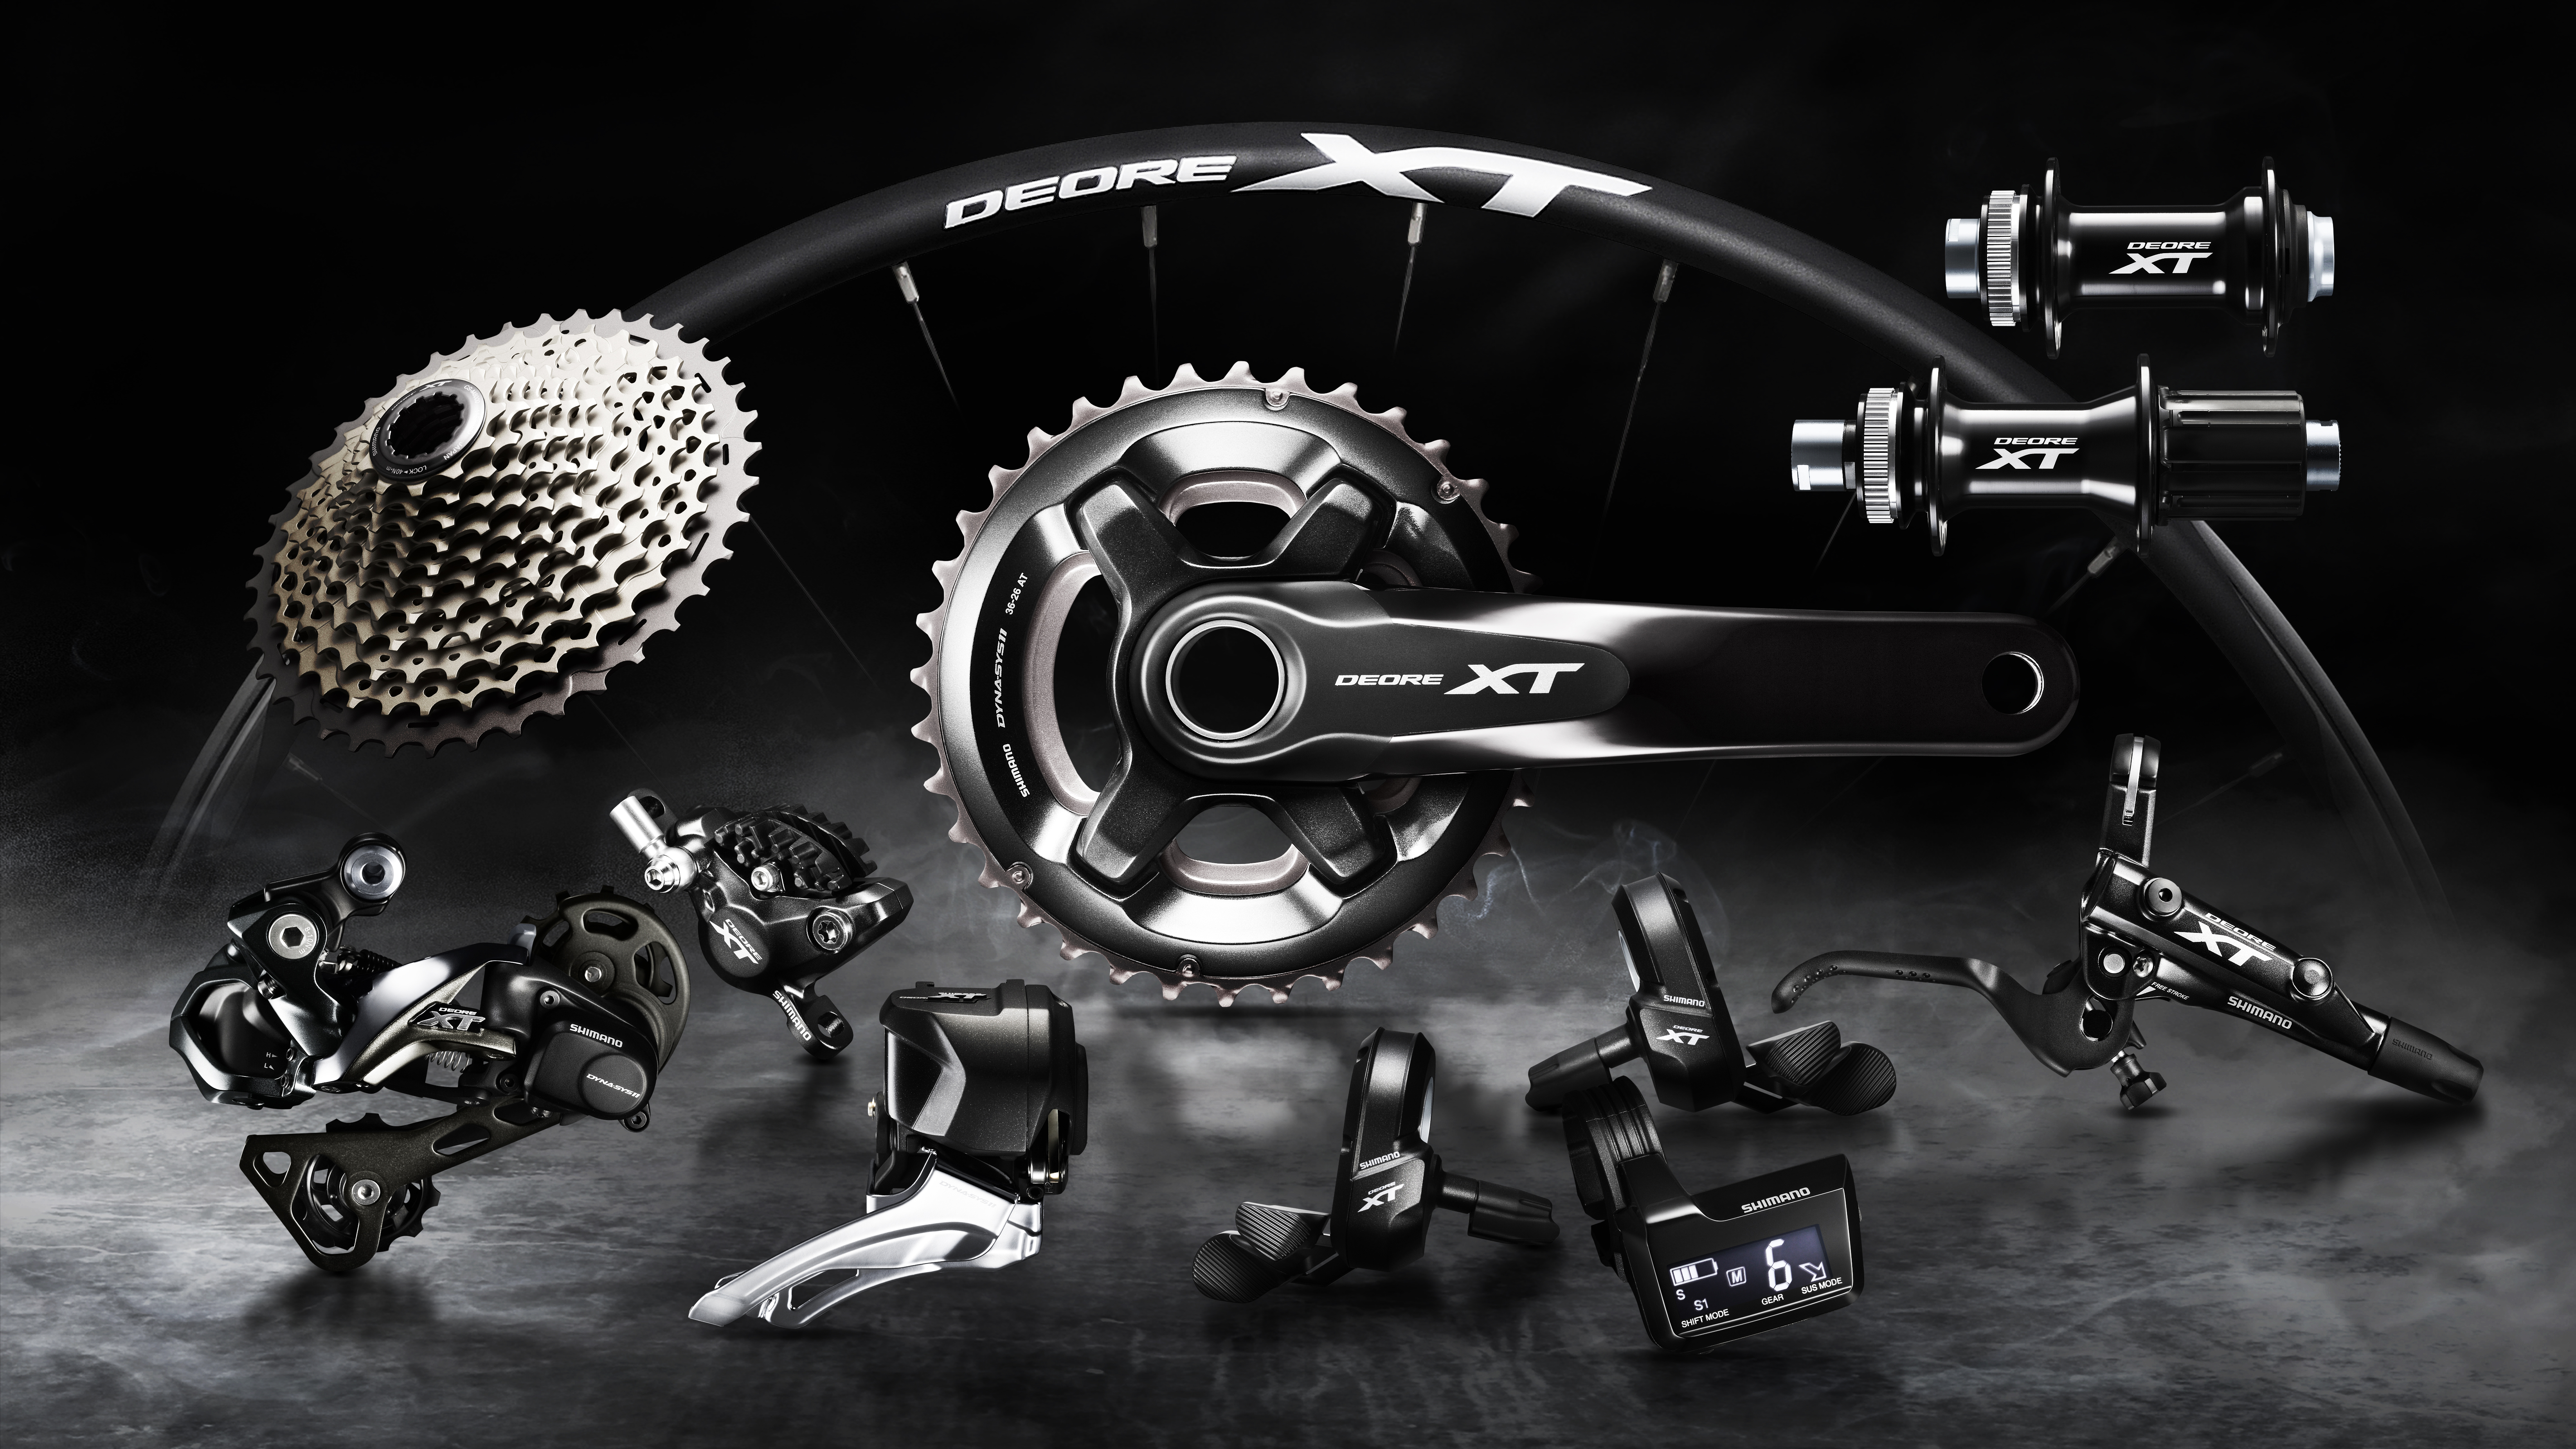 Shimano announces Deore XT Di2 group, plus new wireless features and redesigned SLX parts 